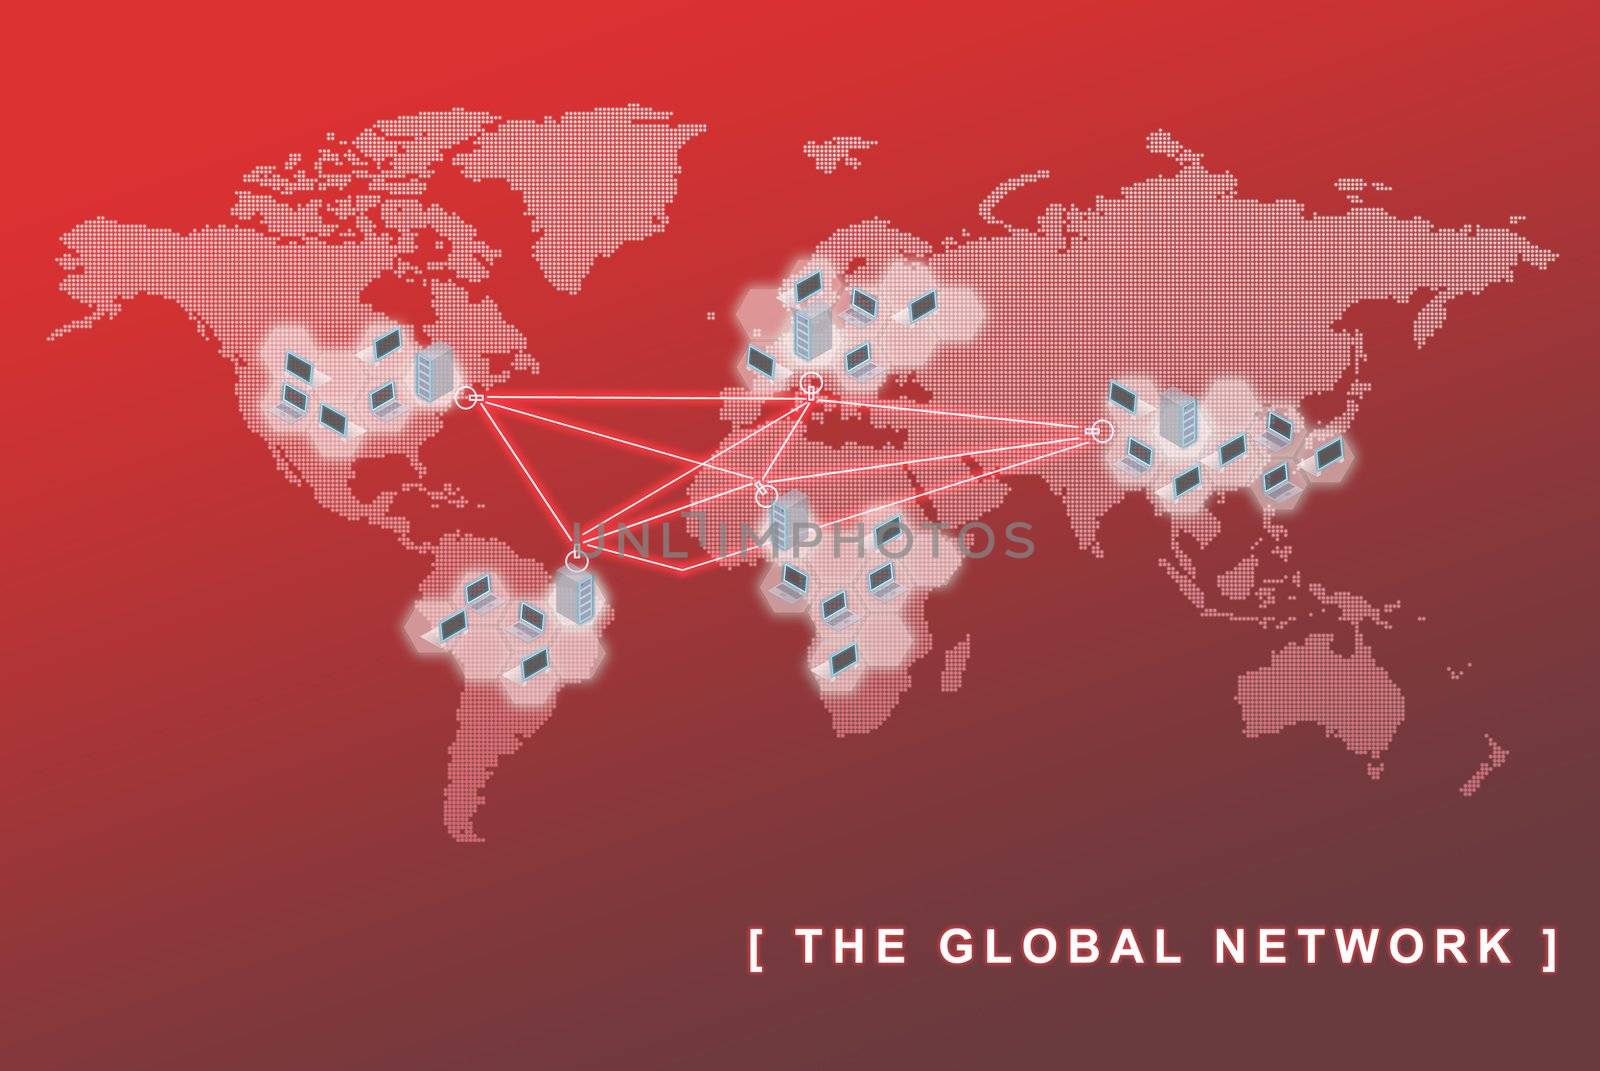 The global network business concept by sasilsolutions